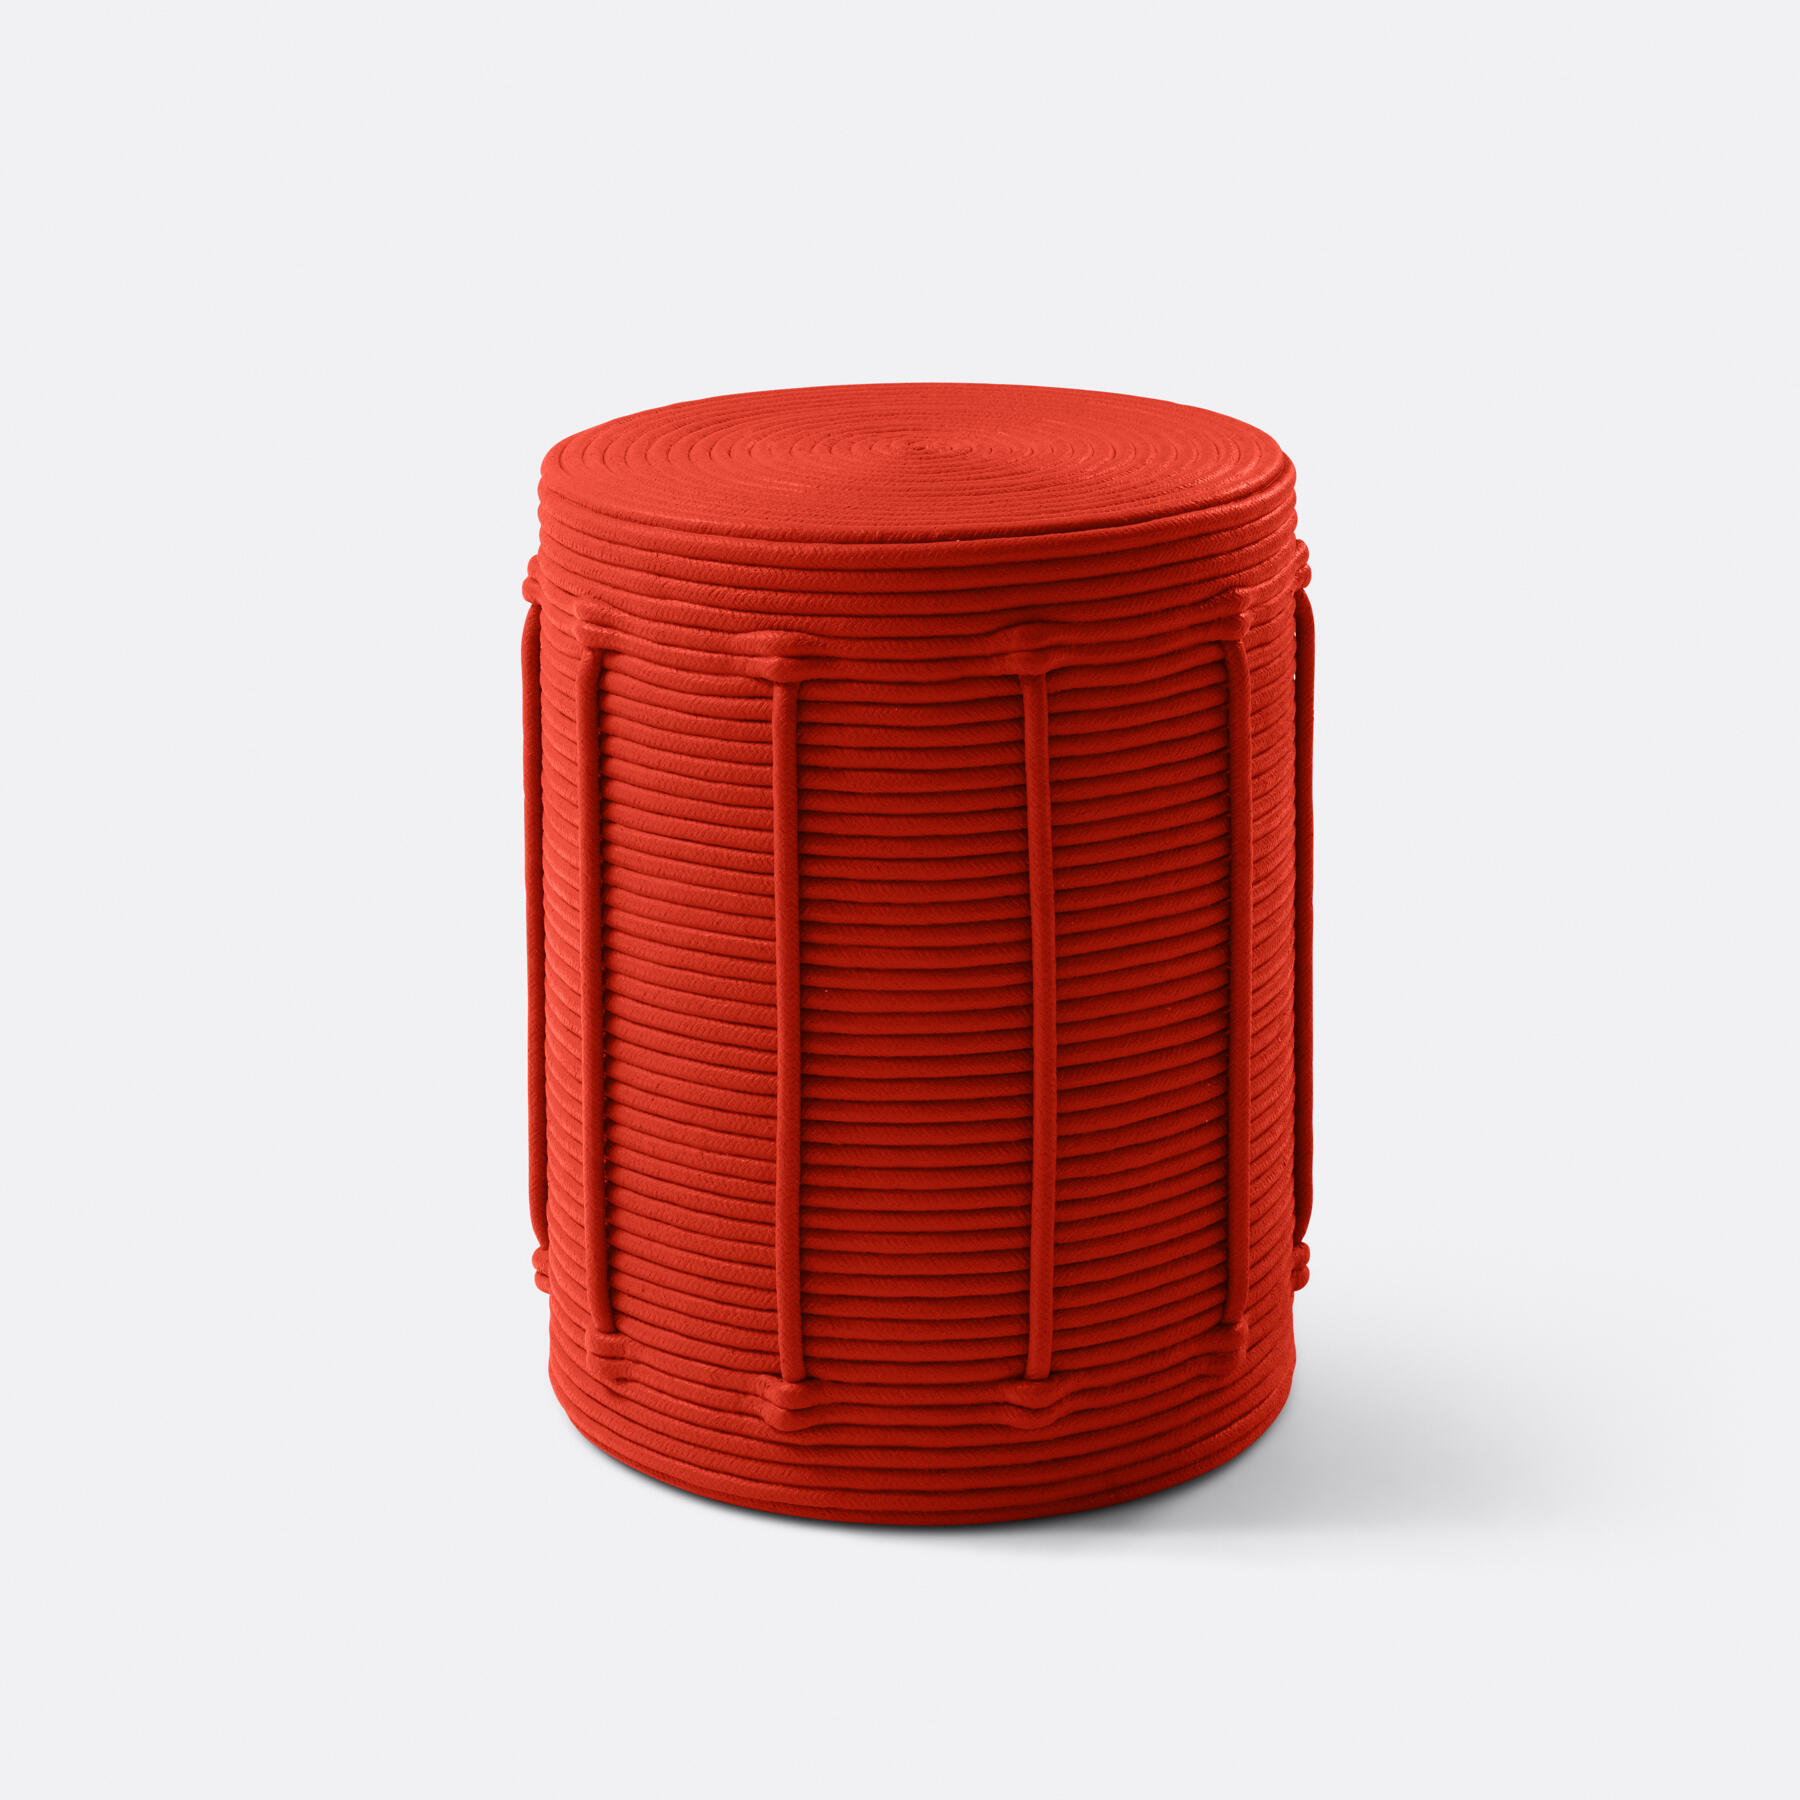 Afrito Stool, Oriental Red